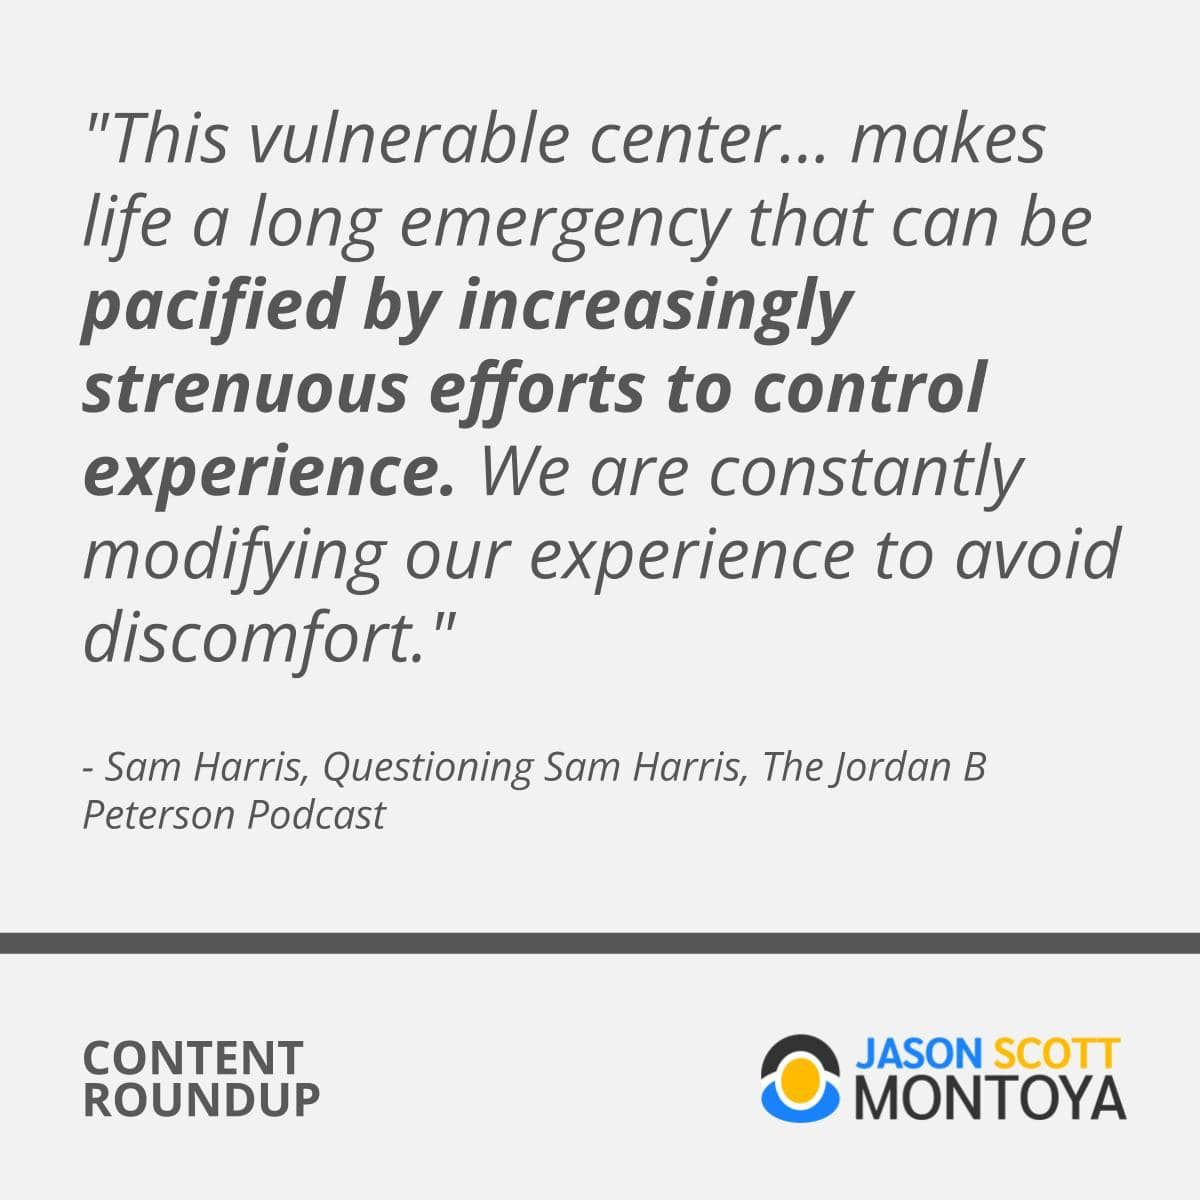 “This vulnerable center... makes life a long emergency that can be pacified by increasingly strenuous efforts to control experience. We are constantly modifying our experience to avoid discomfort." - Sam Harris